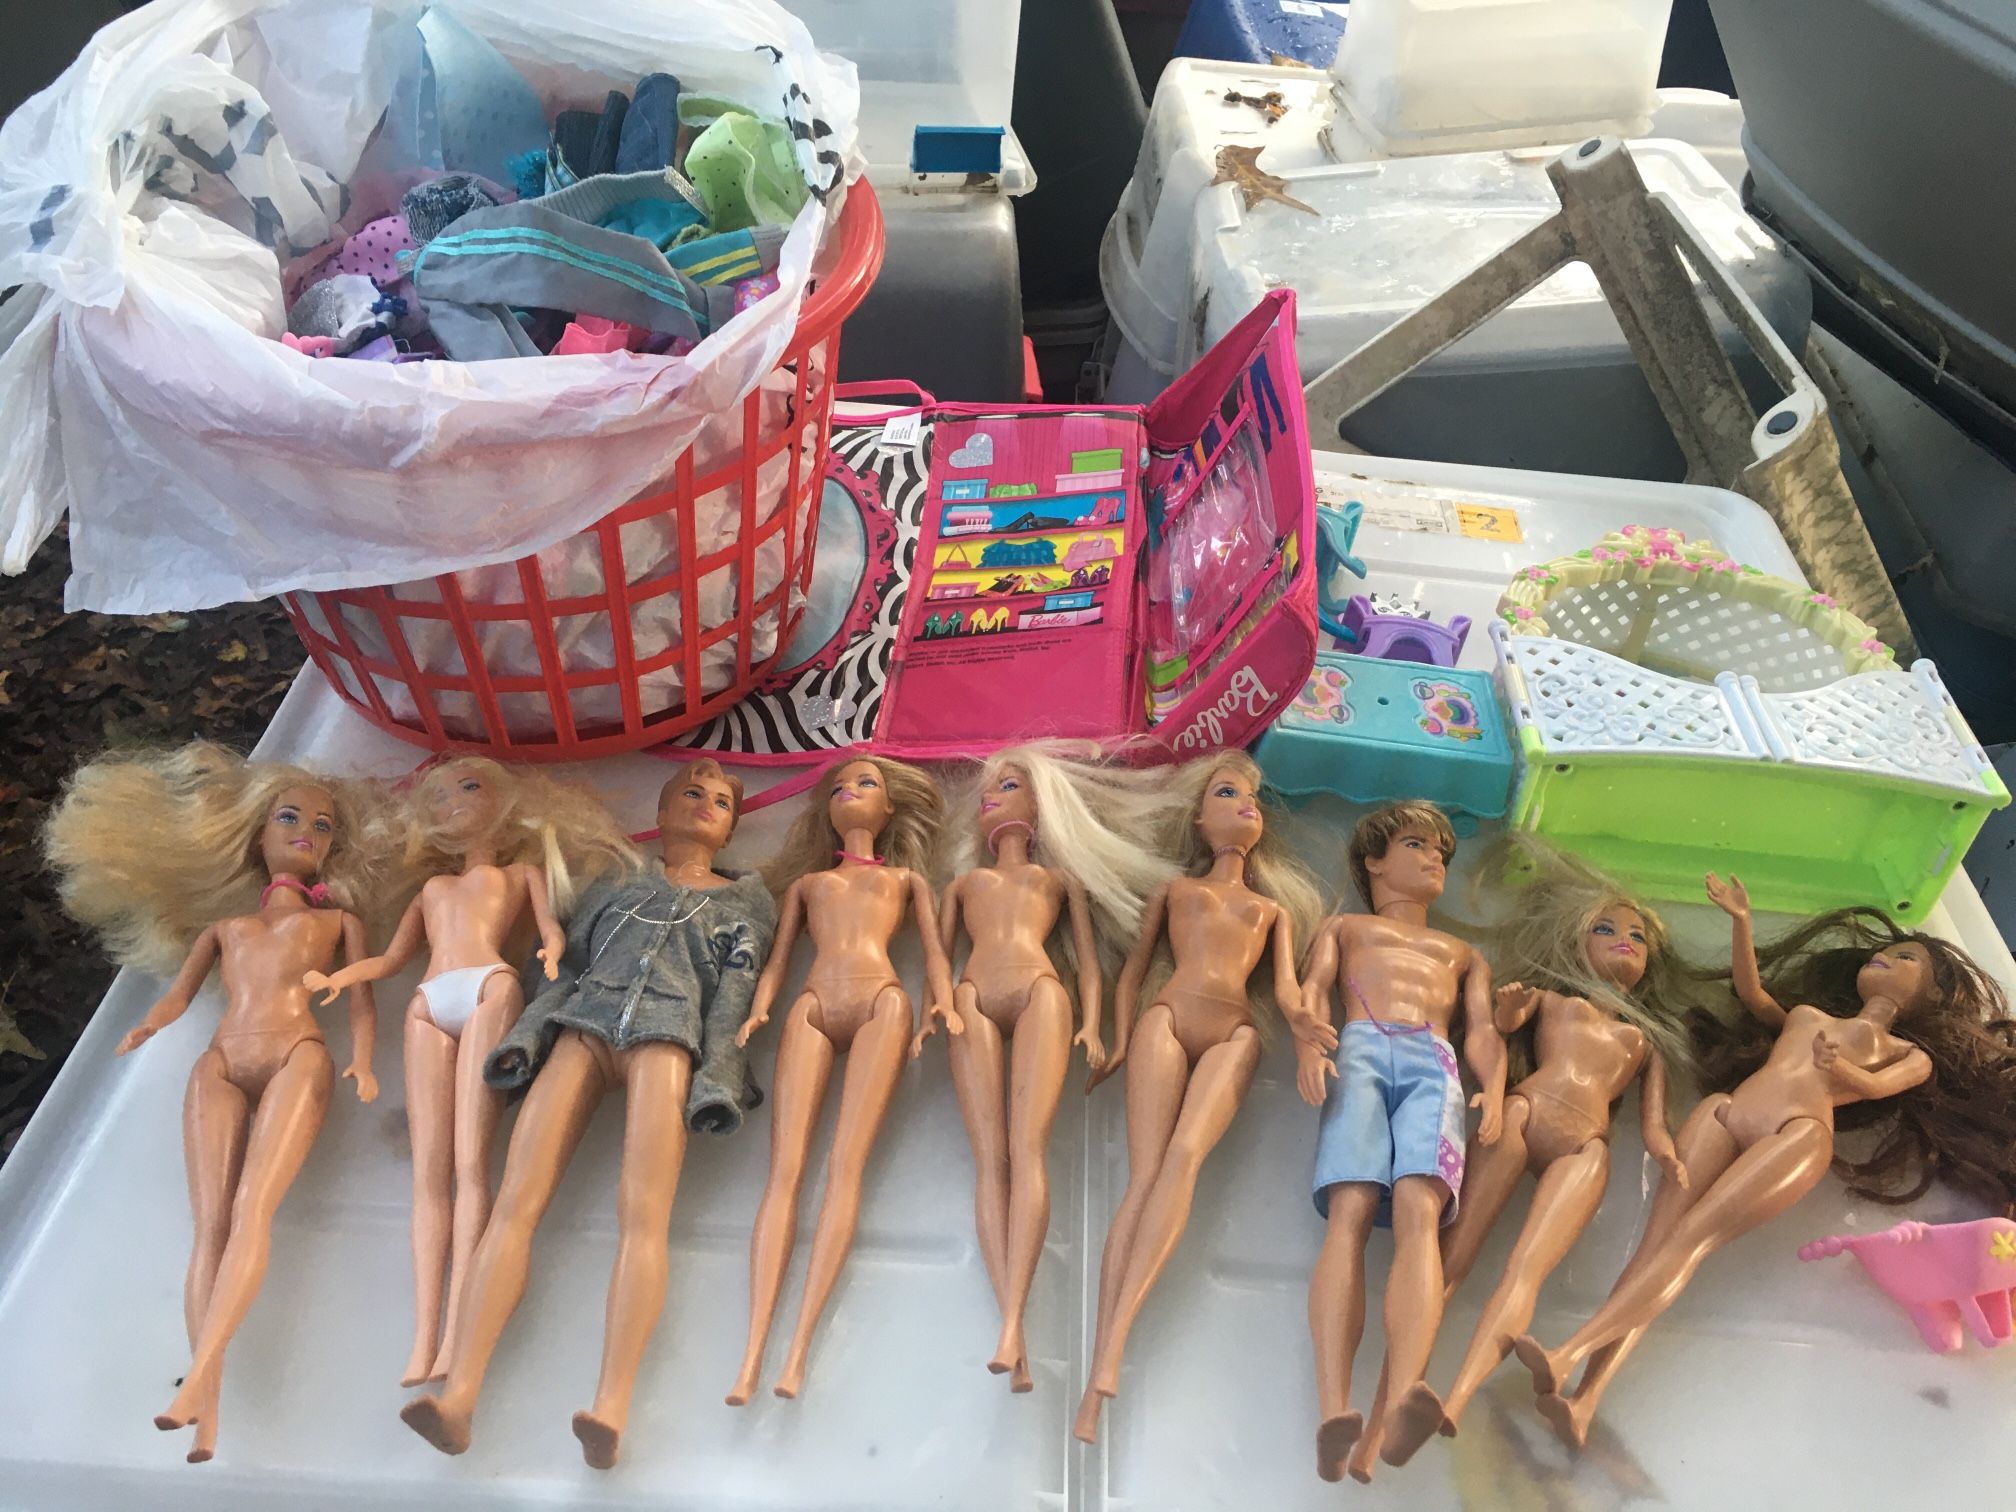 Barbie dolls furniture and large basket of clothes and accessories all for $25 firm